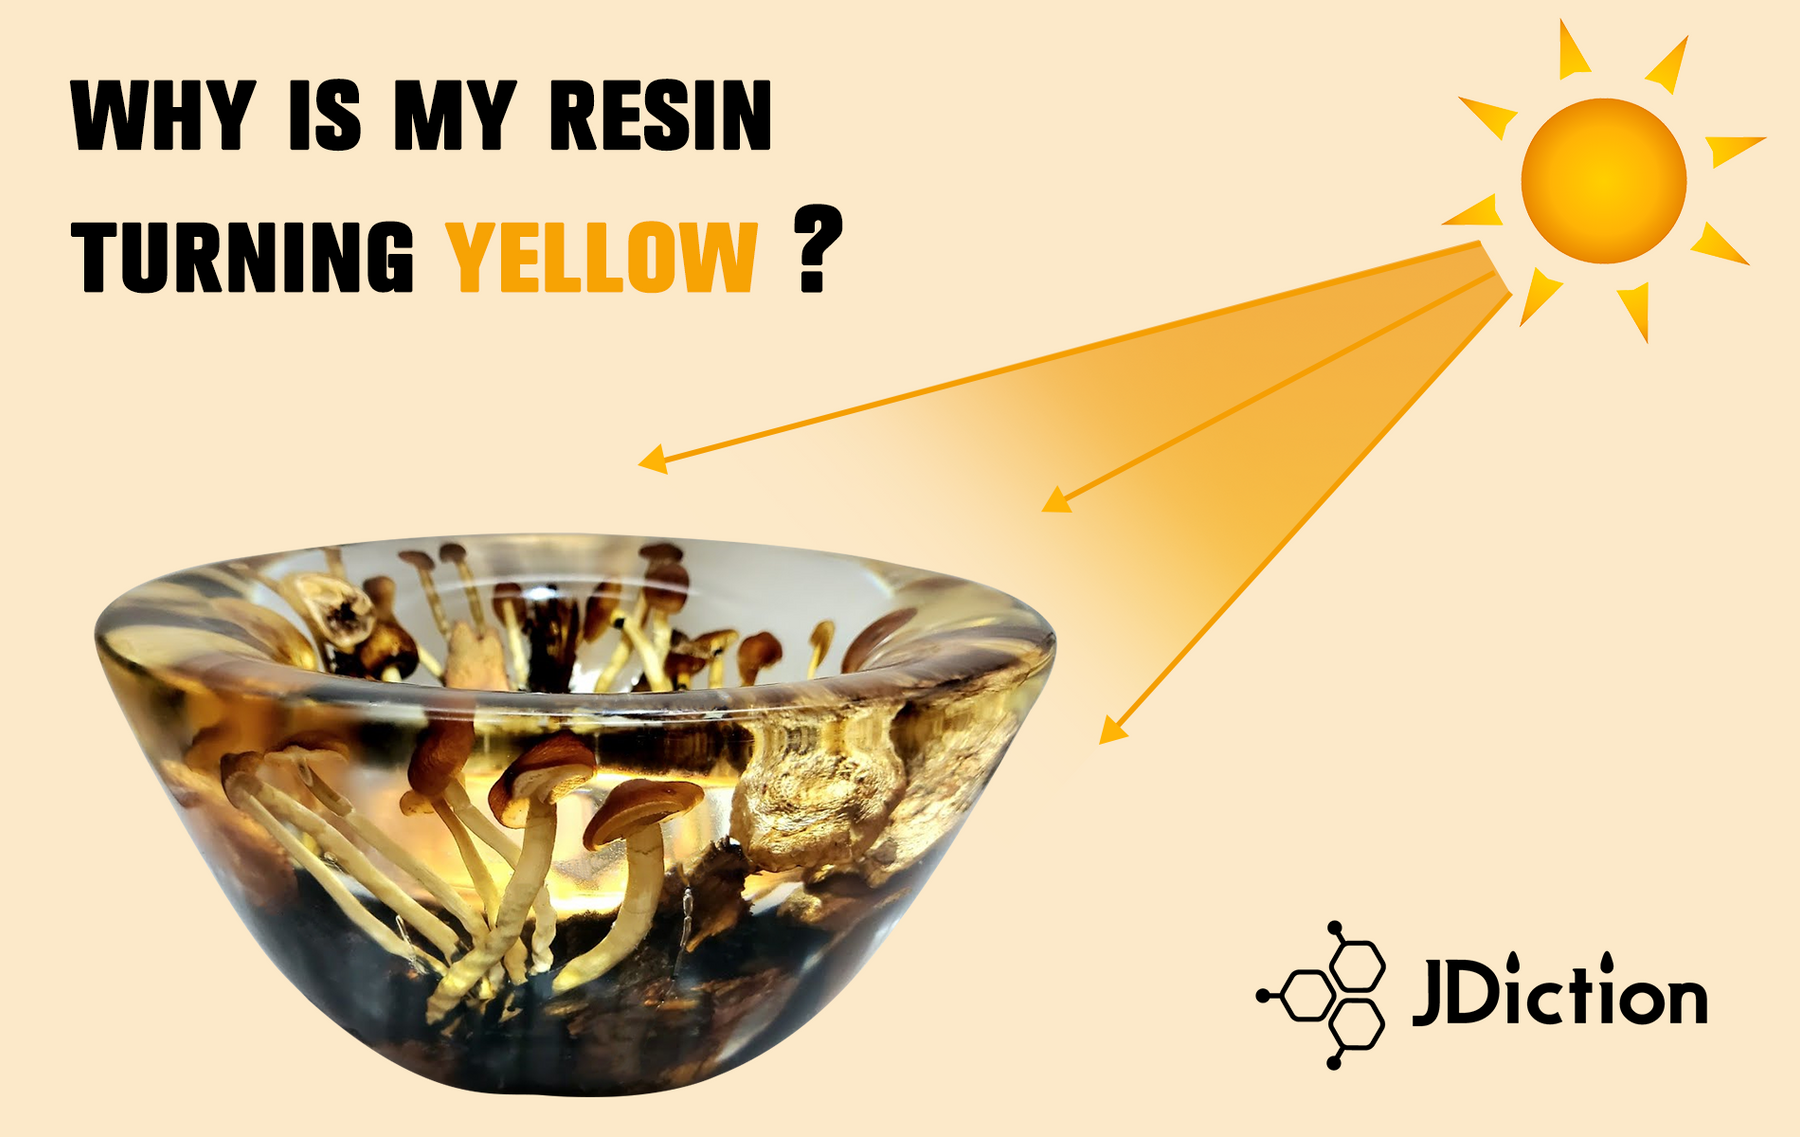 WHY IS MY RESIN TURNING YELLOW? ---- WAYS TO PREVENT IT